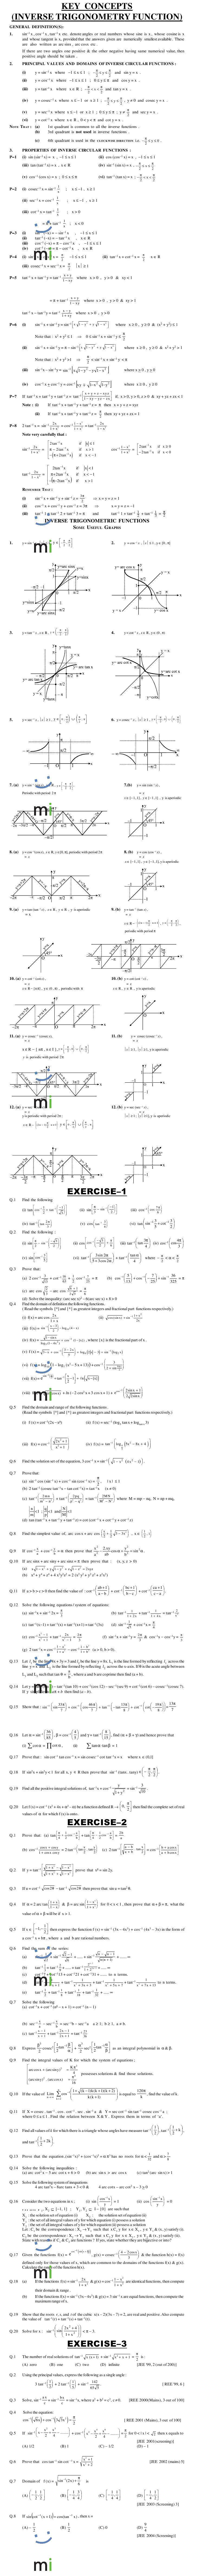 Maths Study Material - Chapter 8